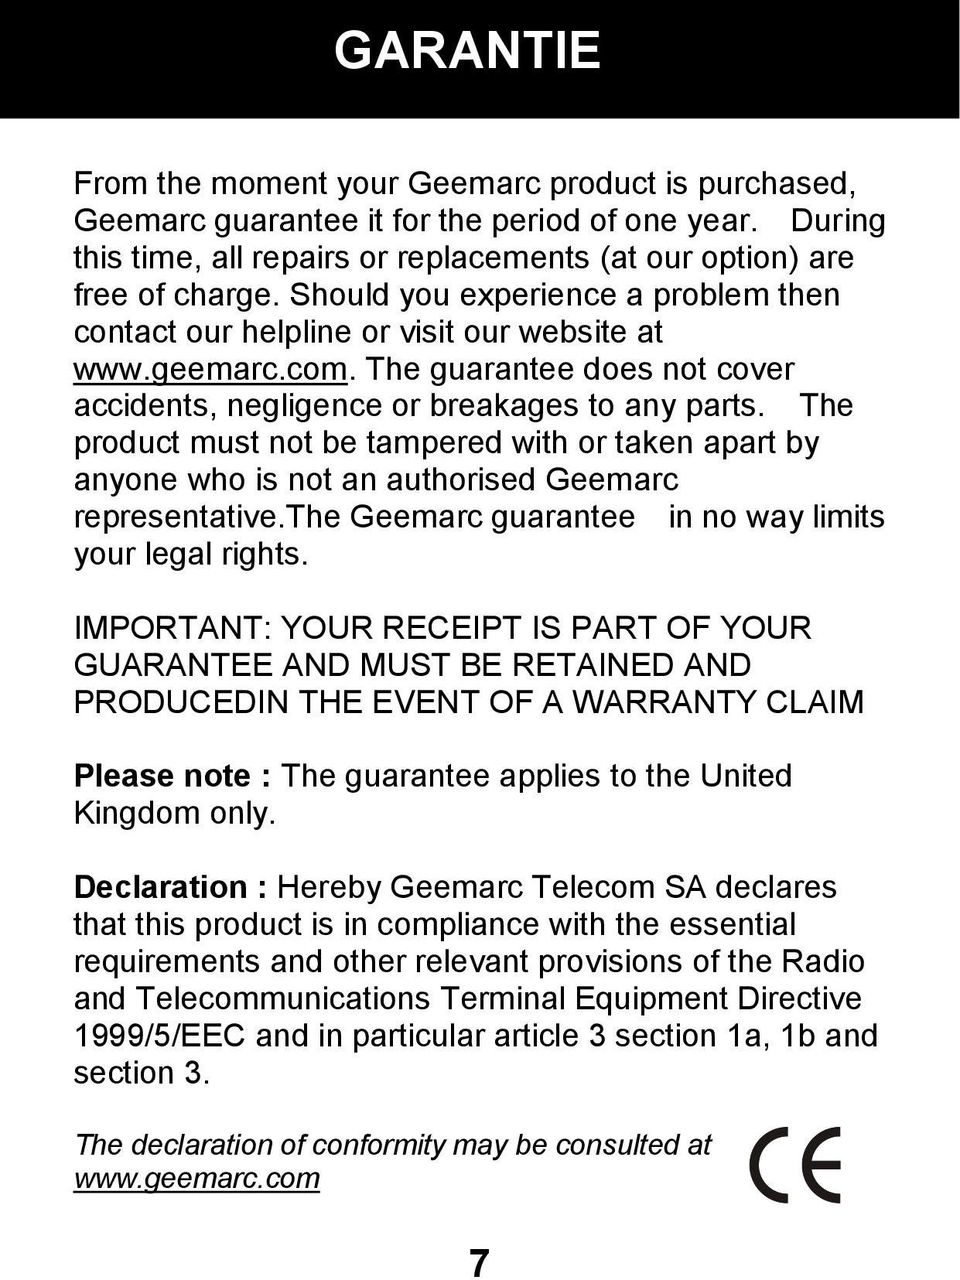 The product must not be tampered with or taken apart by anyone who is not an authorised Geemarc representative.the Geemarc guarantee in no way limits your legal rights.